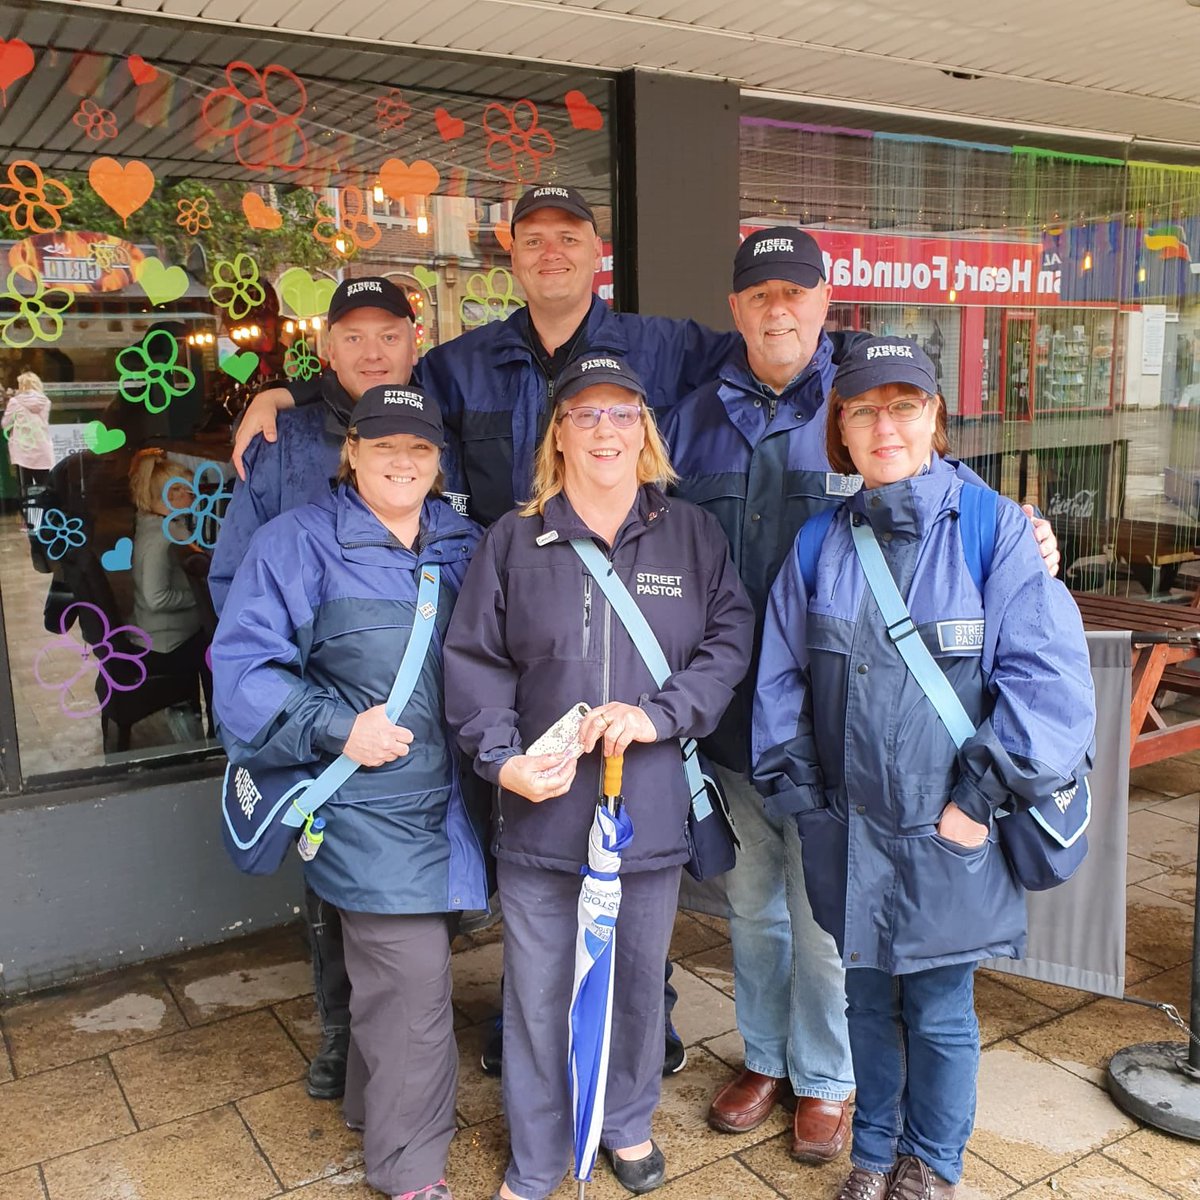 Street pastors out for Pride